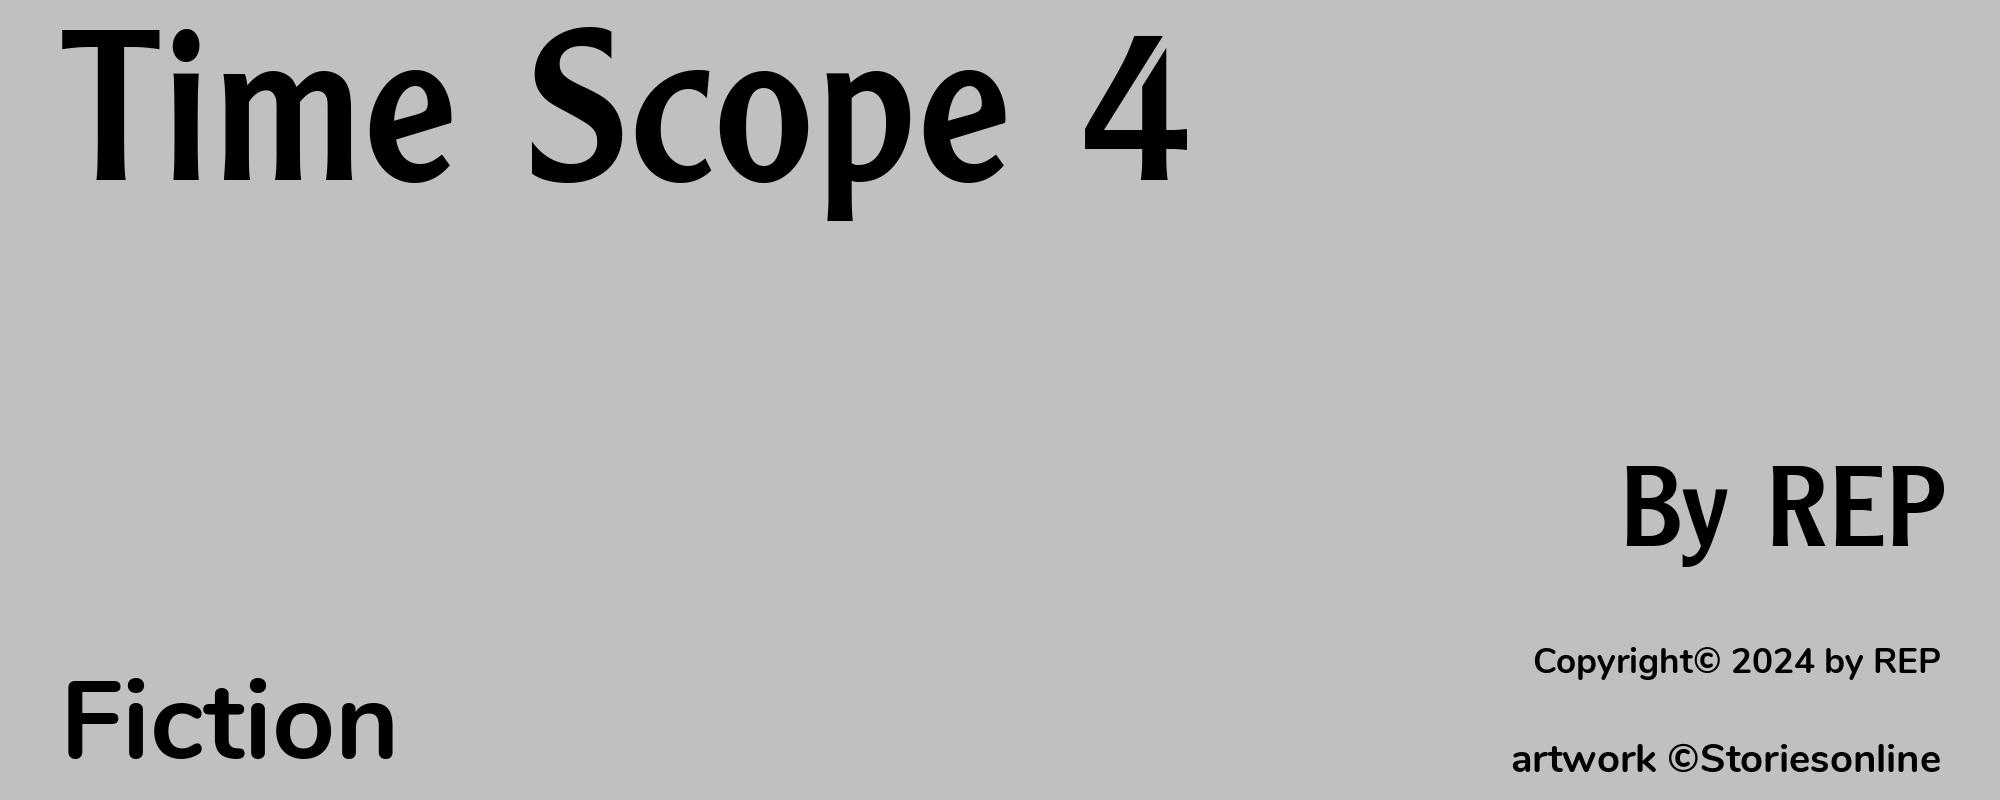 Time Scope 4 - Cover